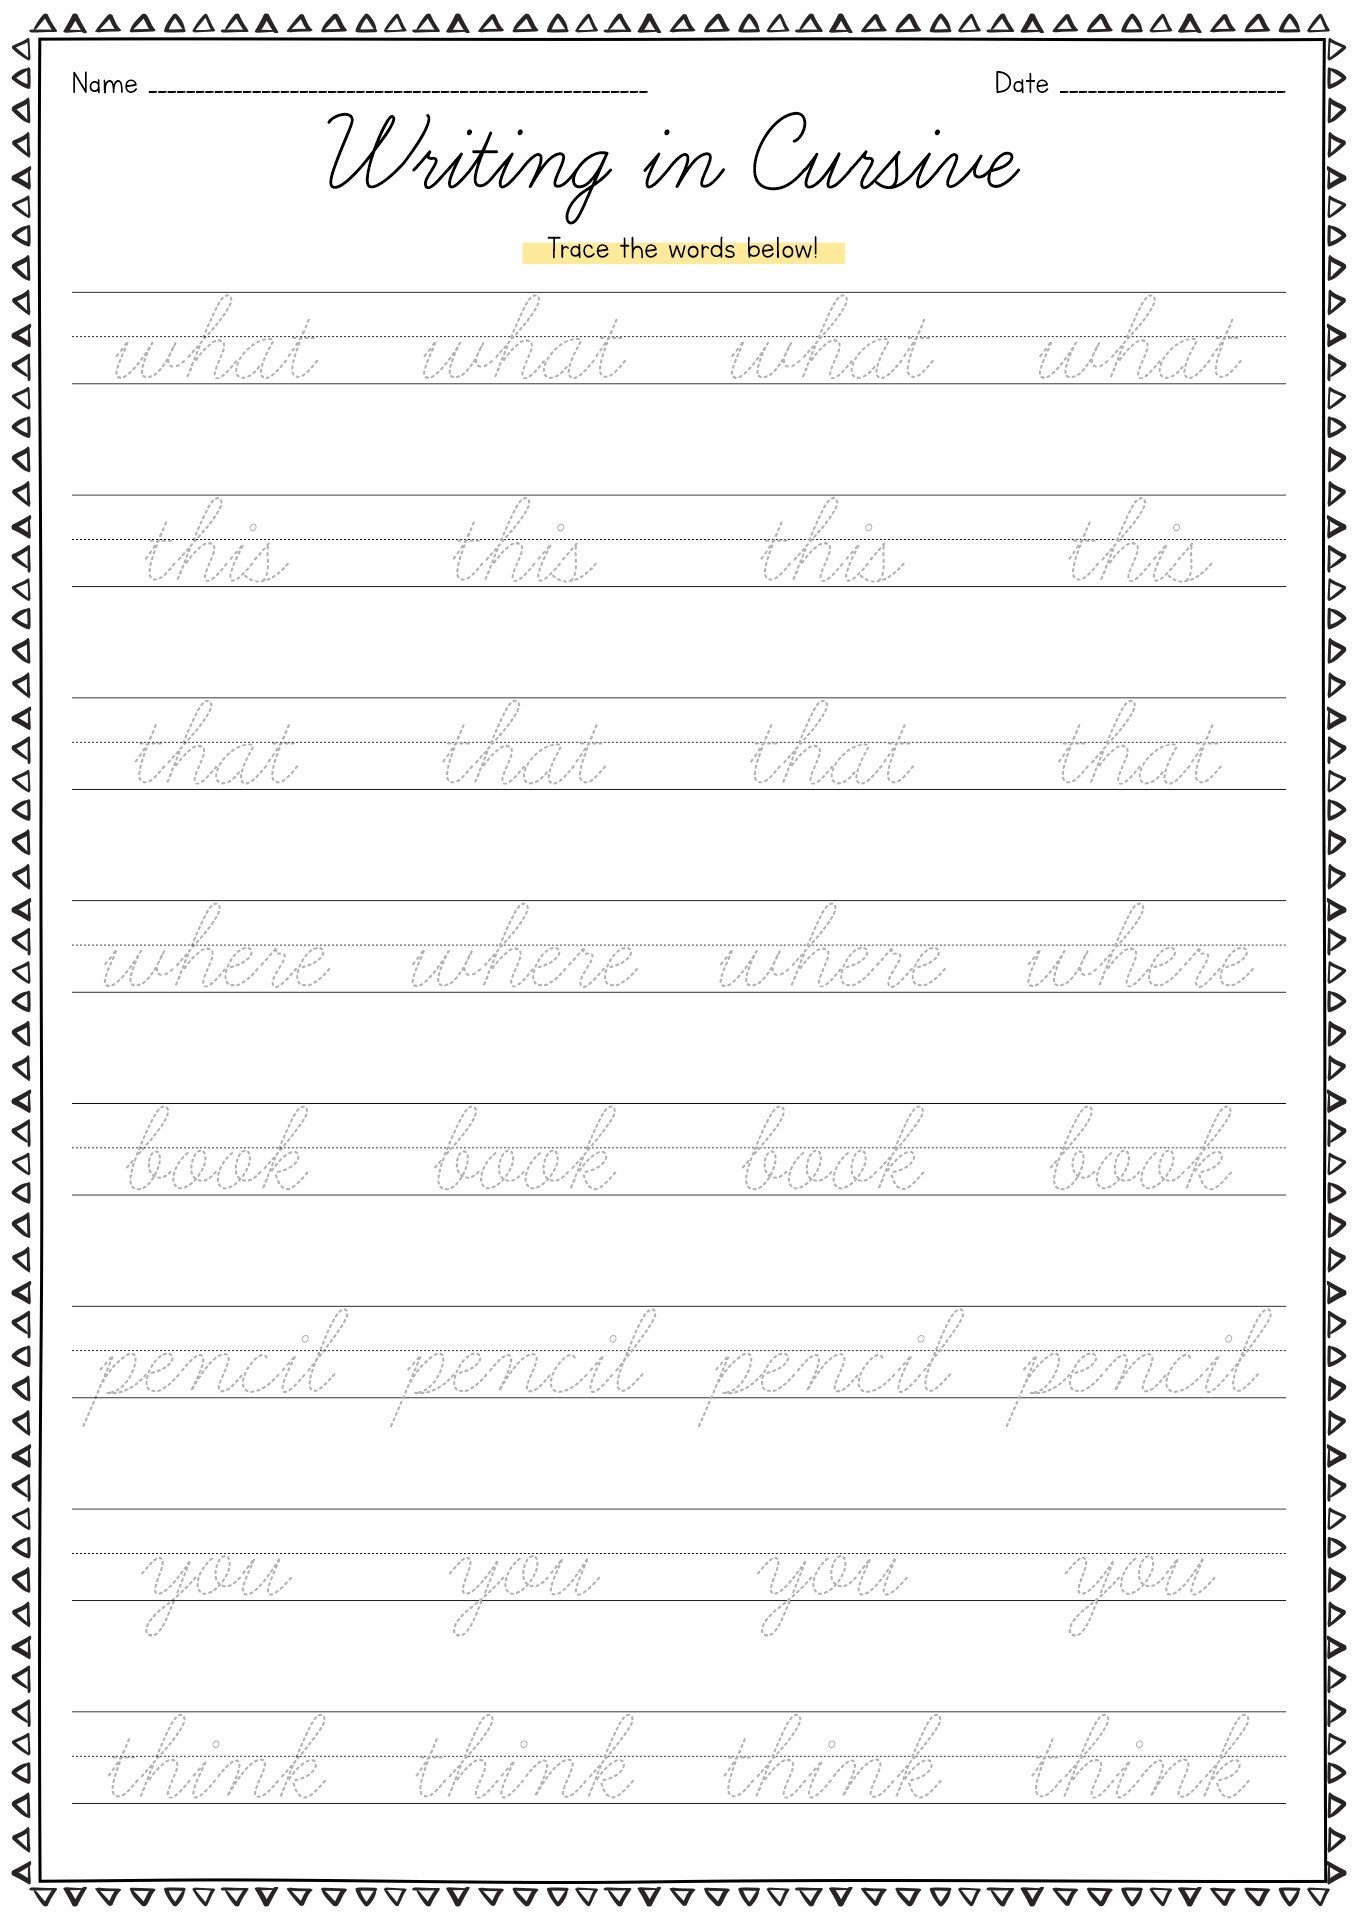 20-occupational-therapy-handwriting-worksheets-worksheet-for-teacher